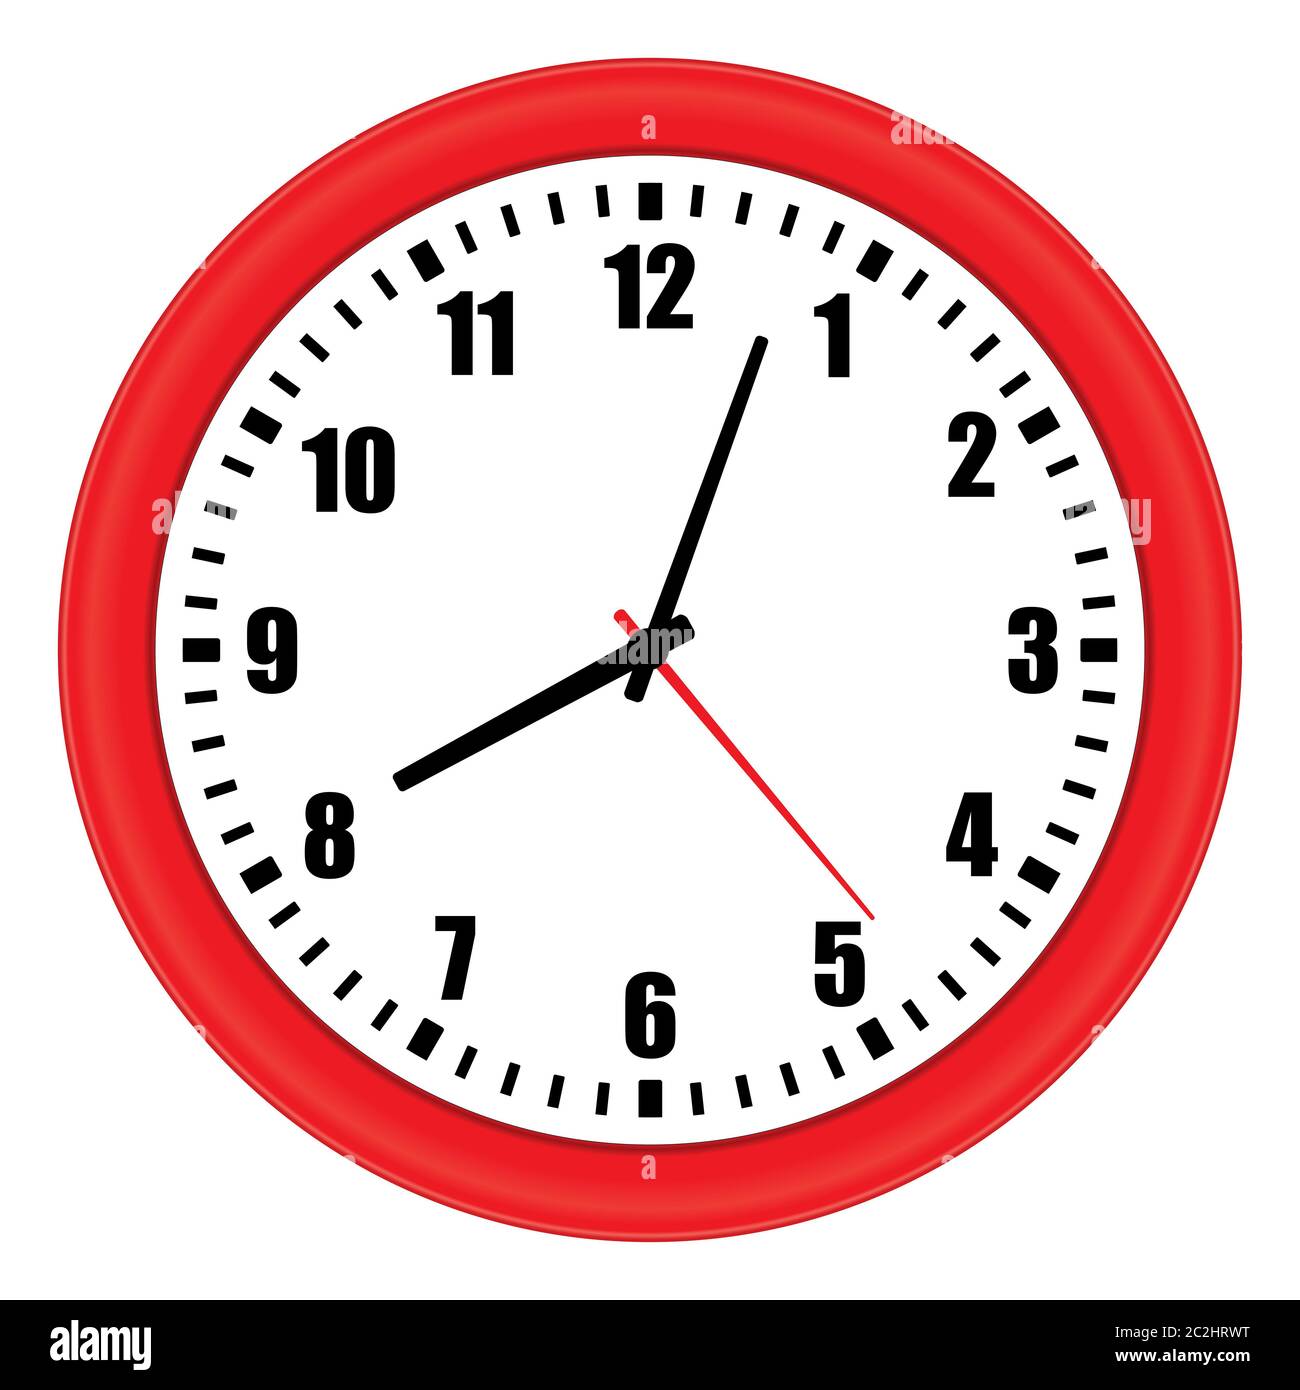 Vector illustration of one modern red wall clock with arabic numerals over white background, low angle front view Stock Photo